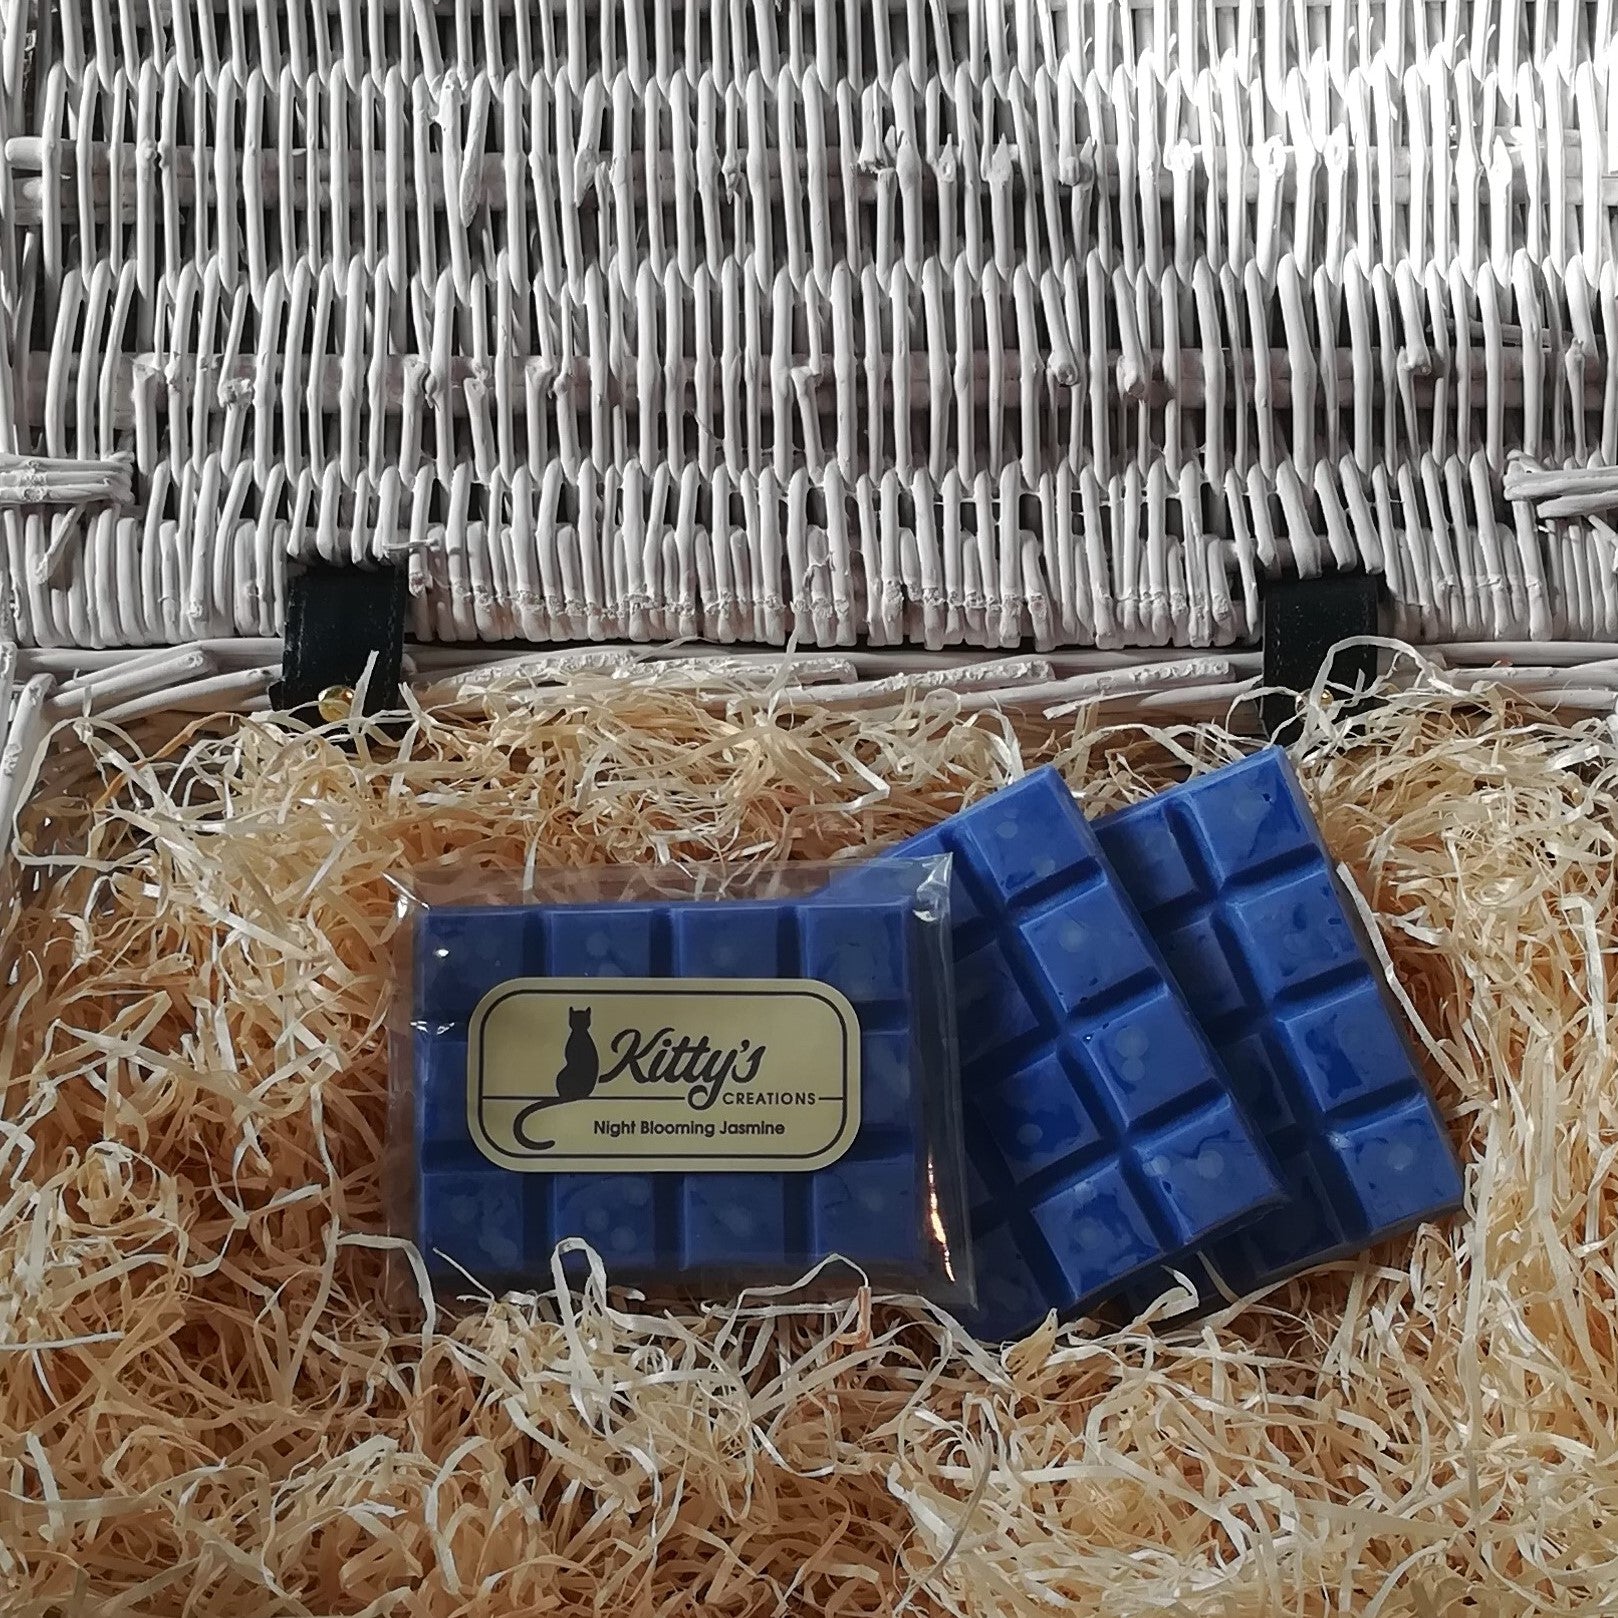 Three hand-made rectangular Wax Melts, each one midnight blue with a soft dusty surface and delicate Jasmine flowers beneath, resting in a basket of straw. Each melt reveals a delicate soothing Jasmine scent.